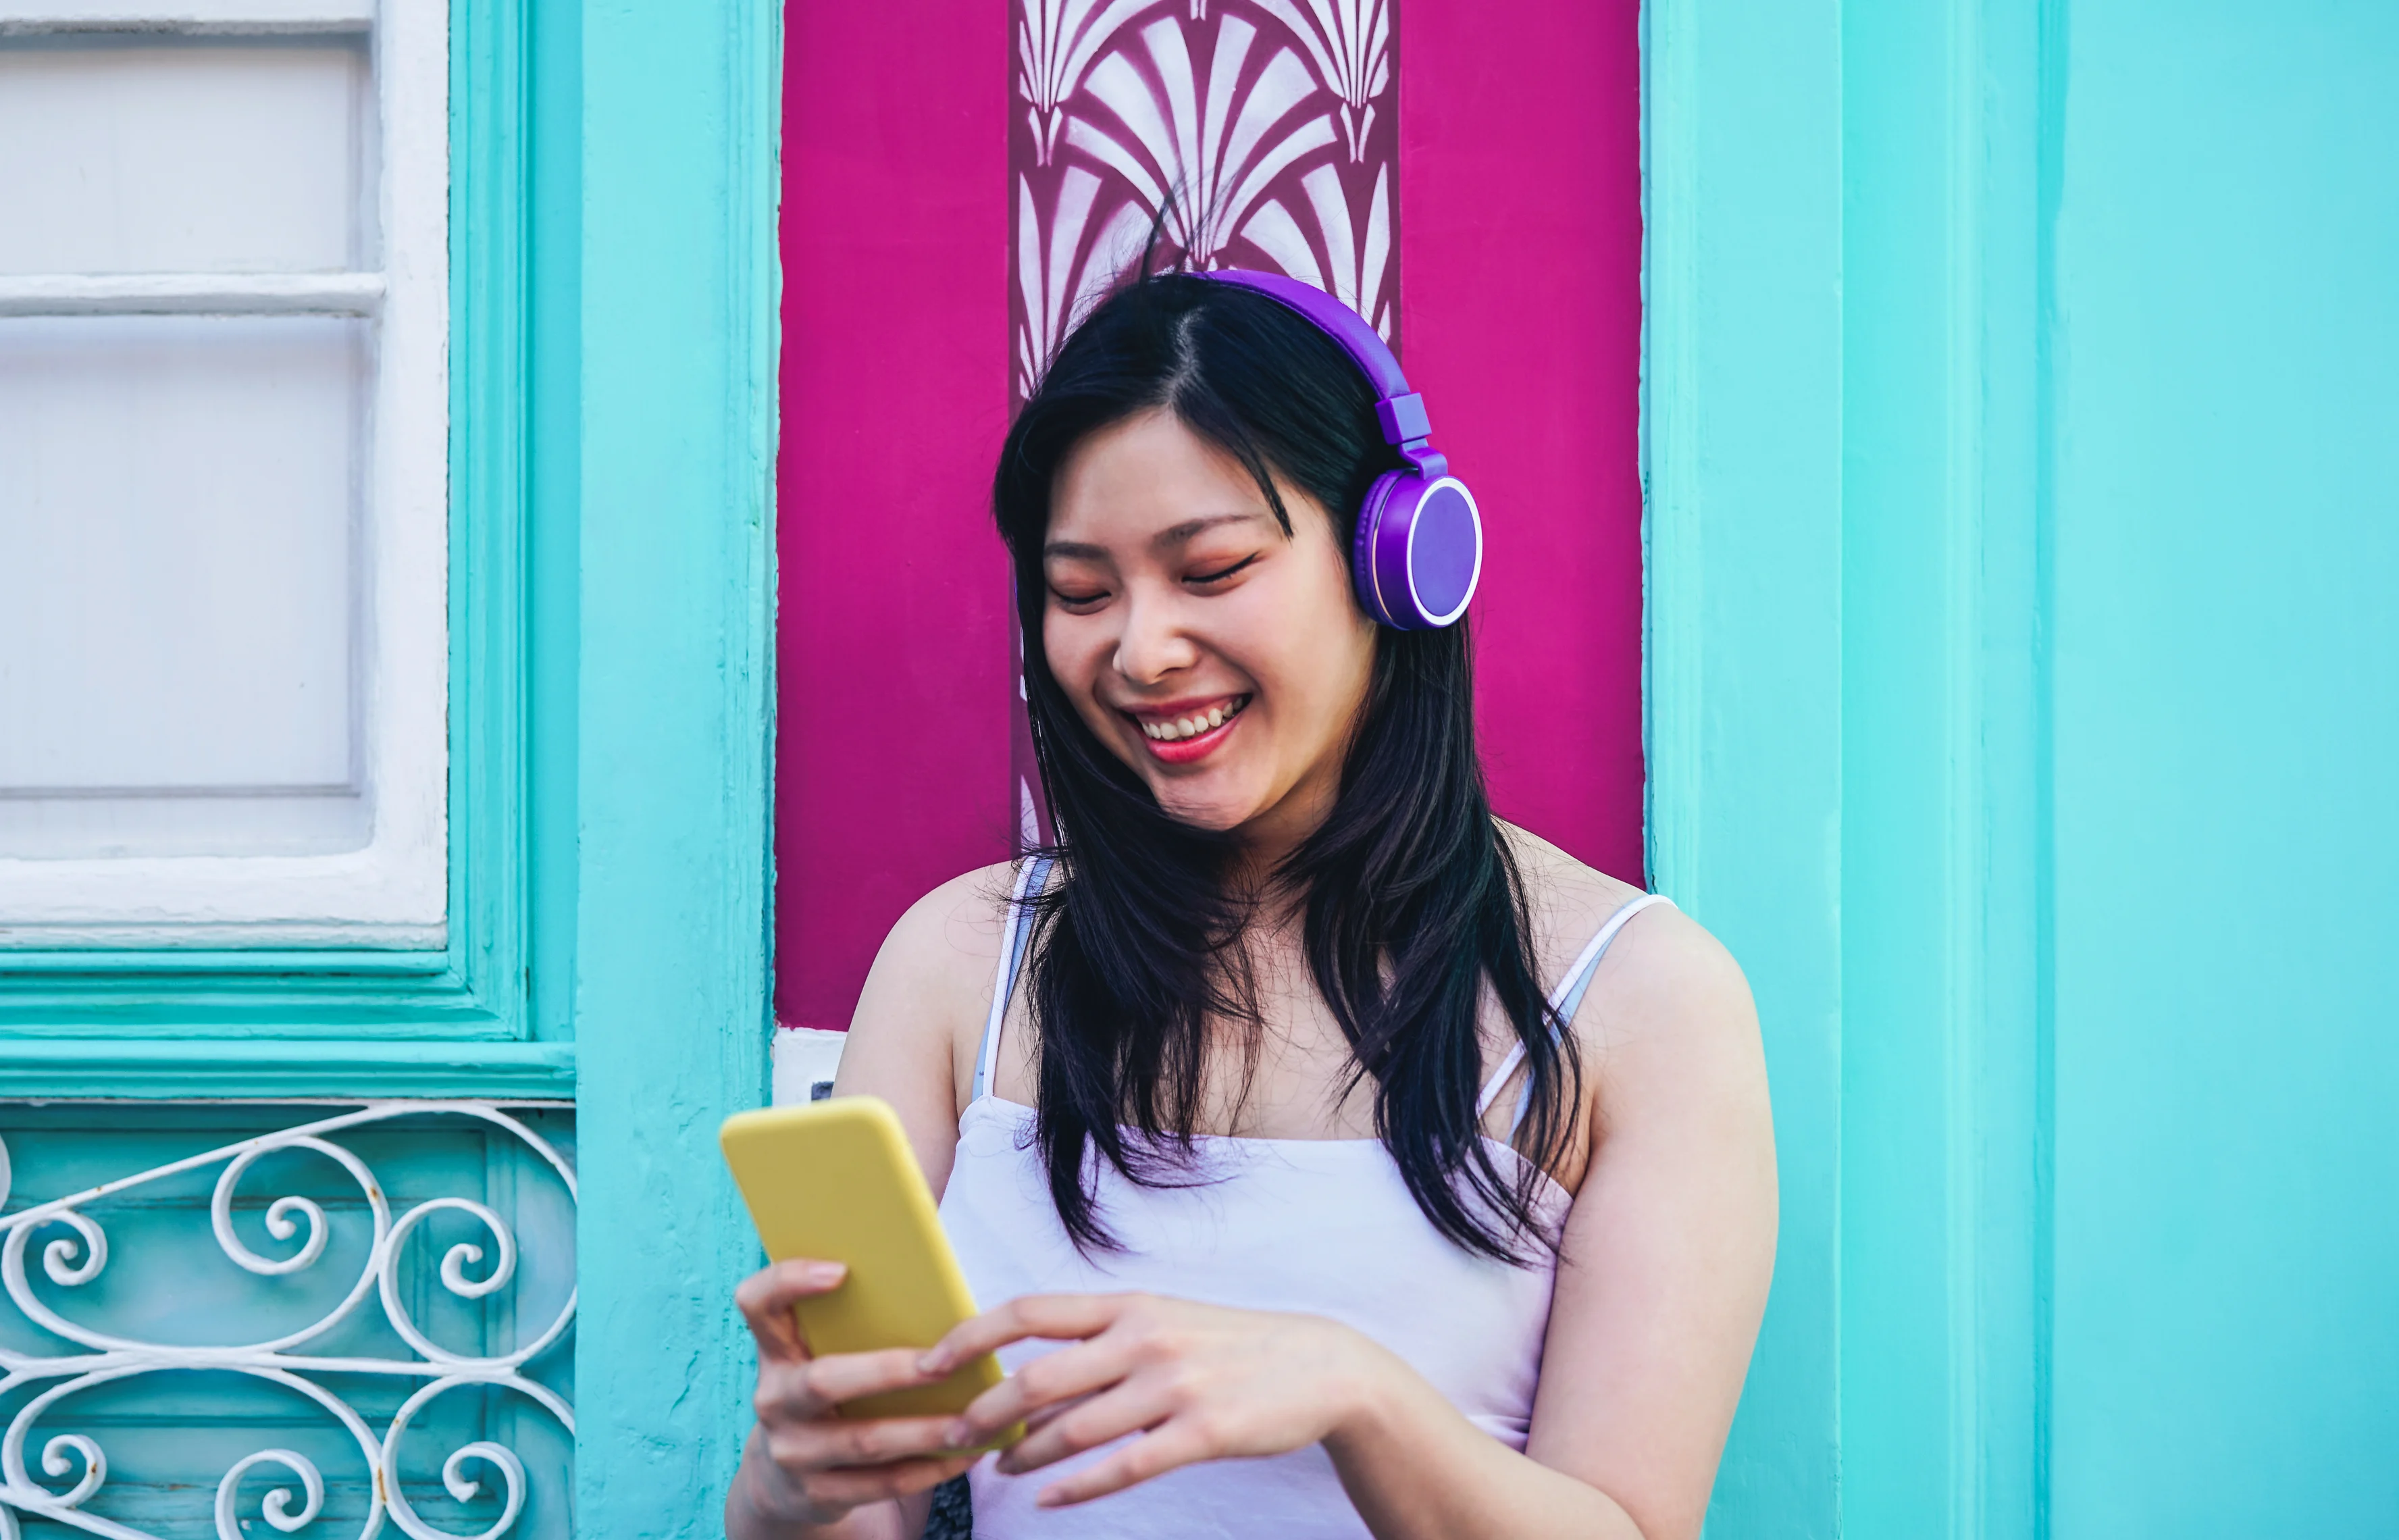 Girl with headphones looking at her phone in front of a turquoise and purple wall